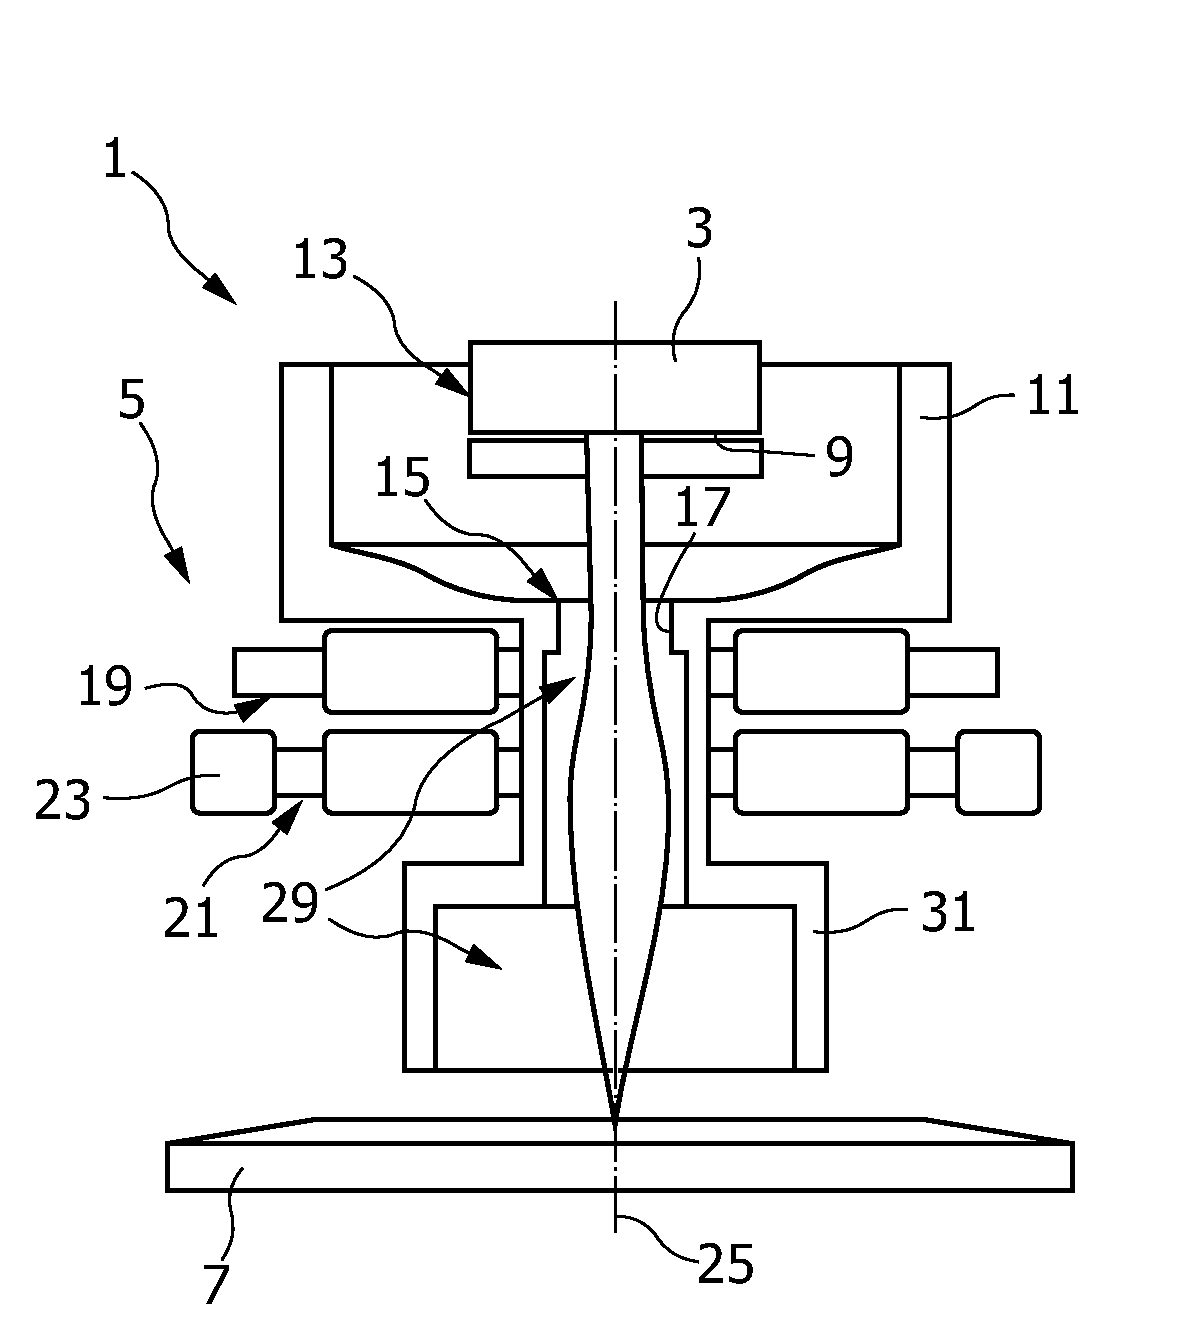 Electron optical apparatus, x-ray emitting device and method of producing an electron beam